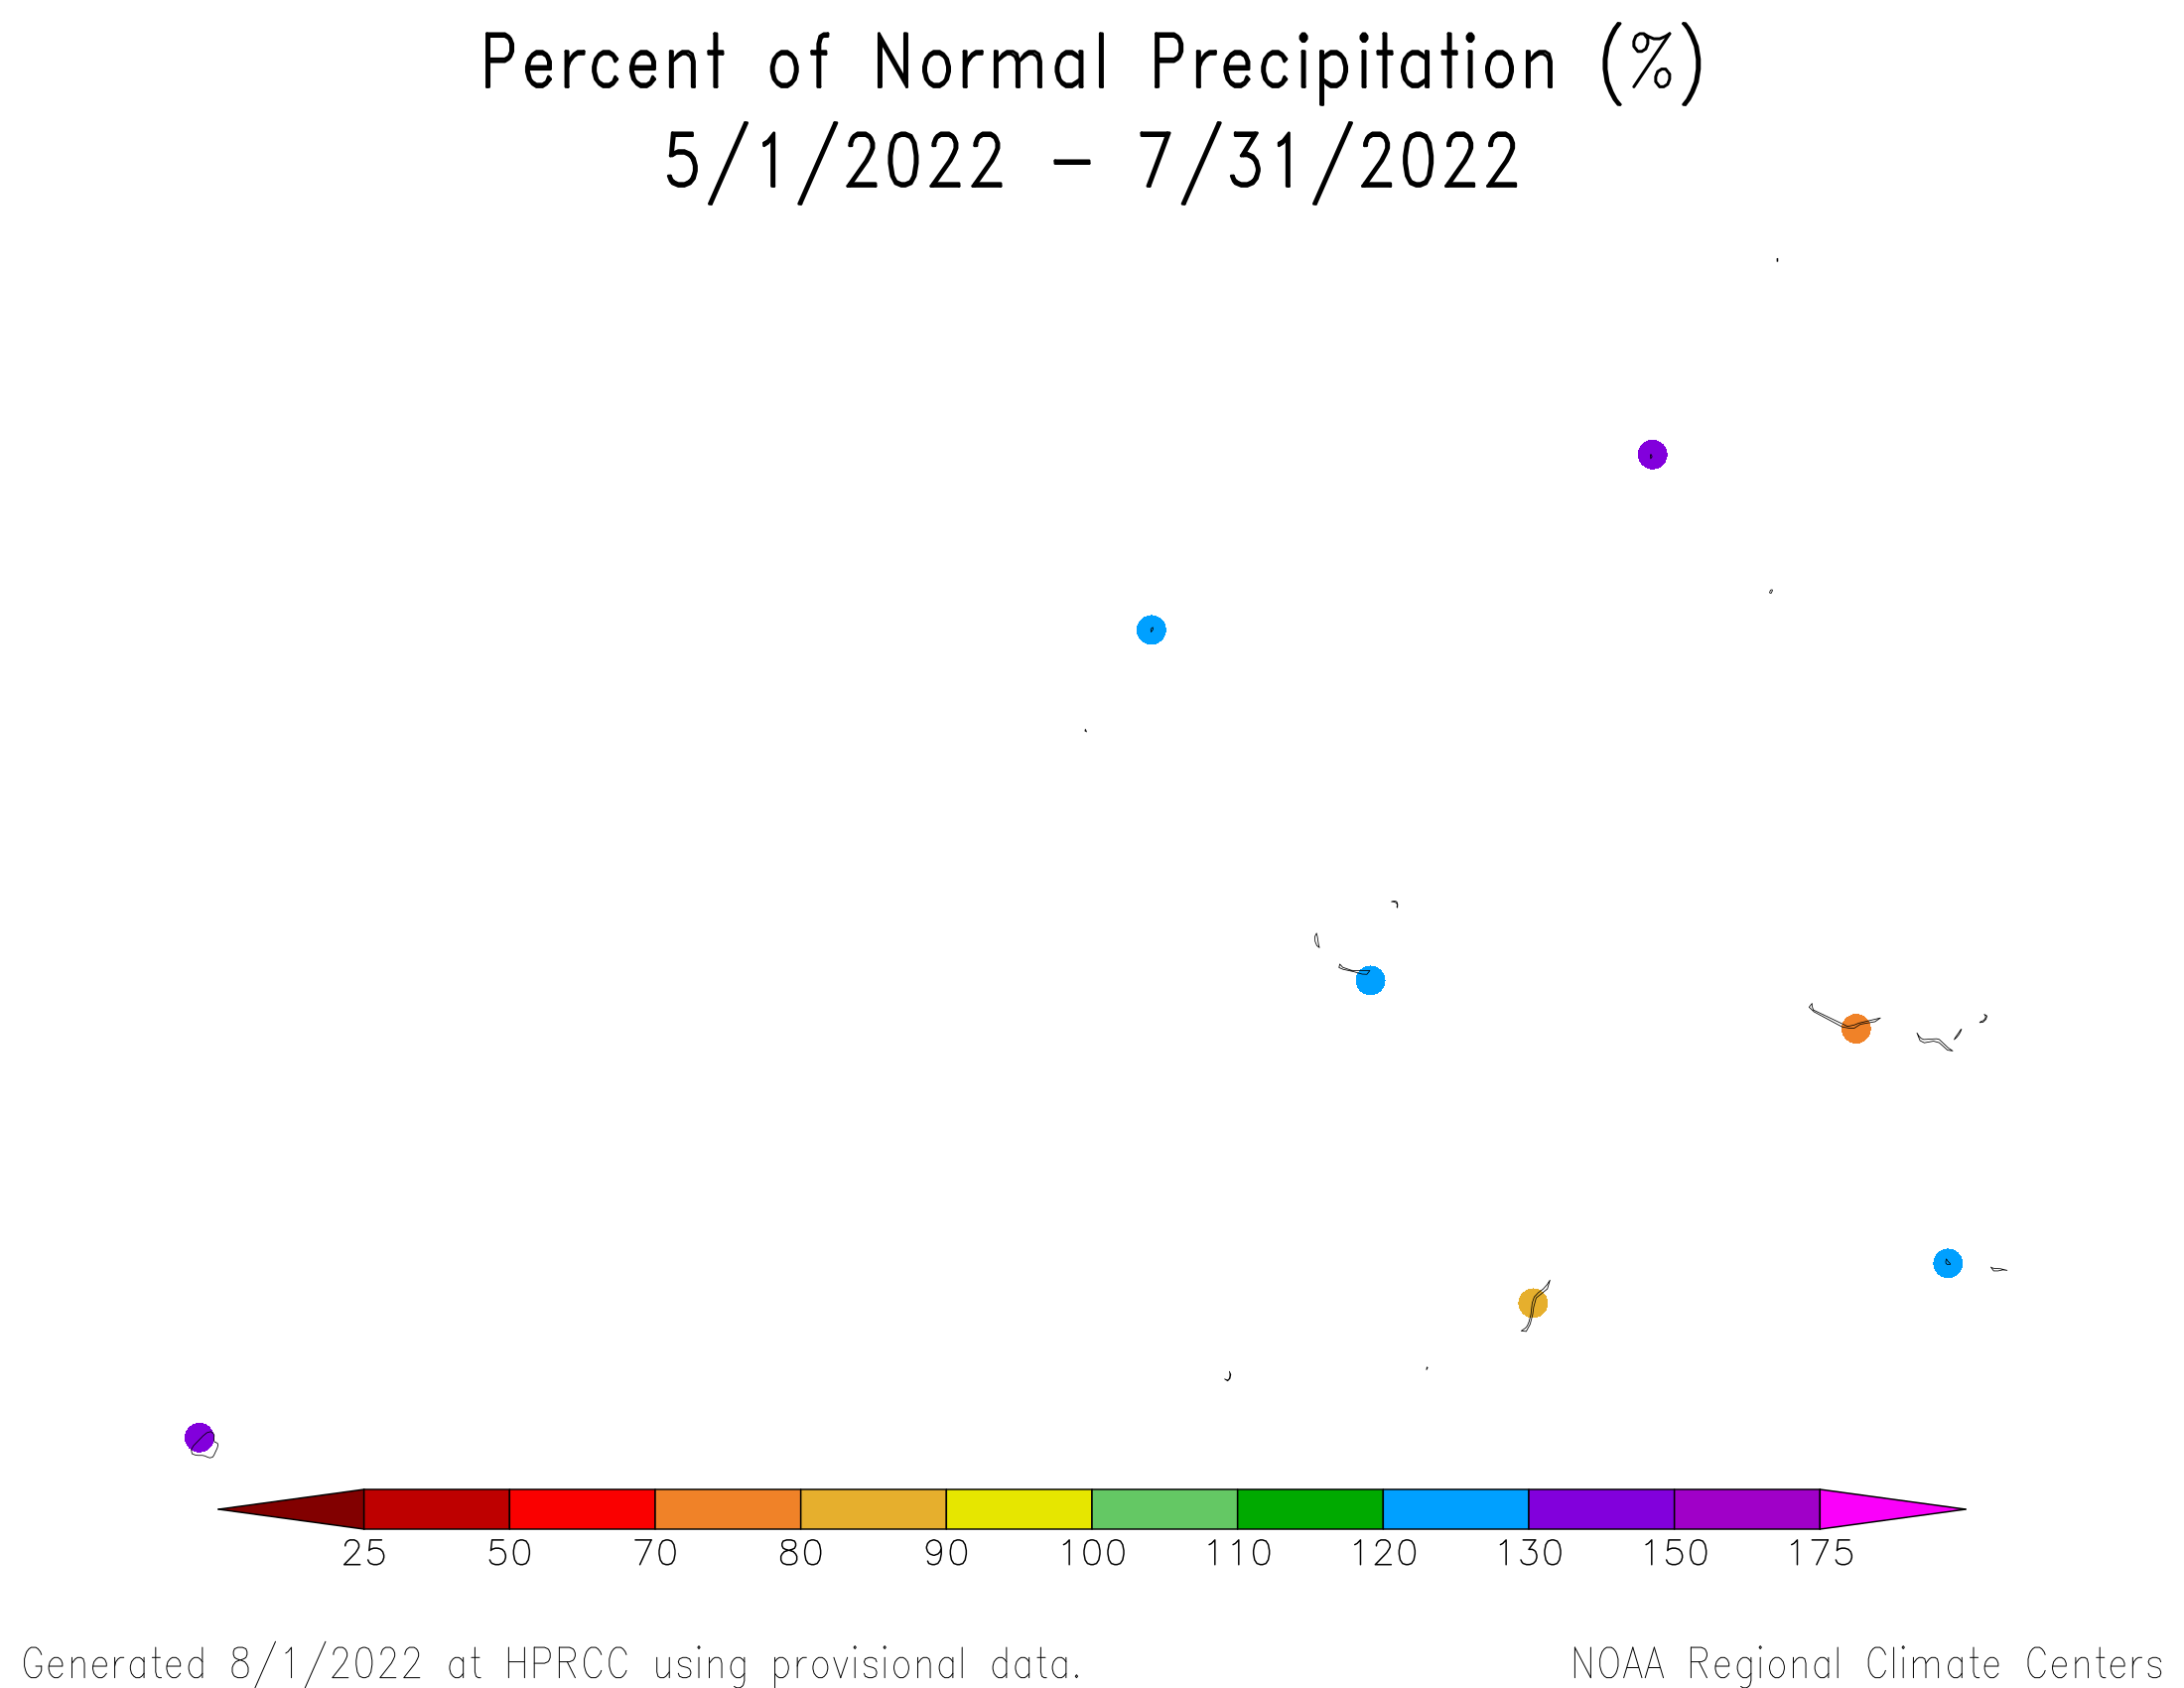 3-month Percent of Normal Precipitation for the Marshall Islands